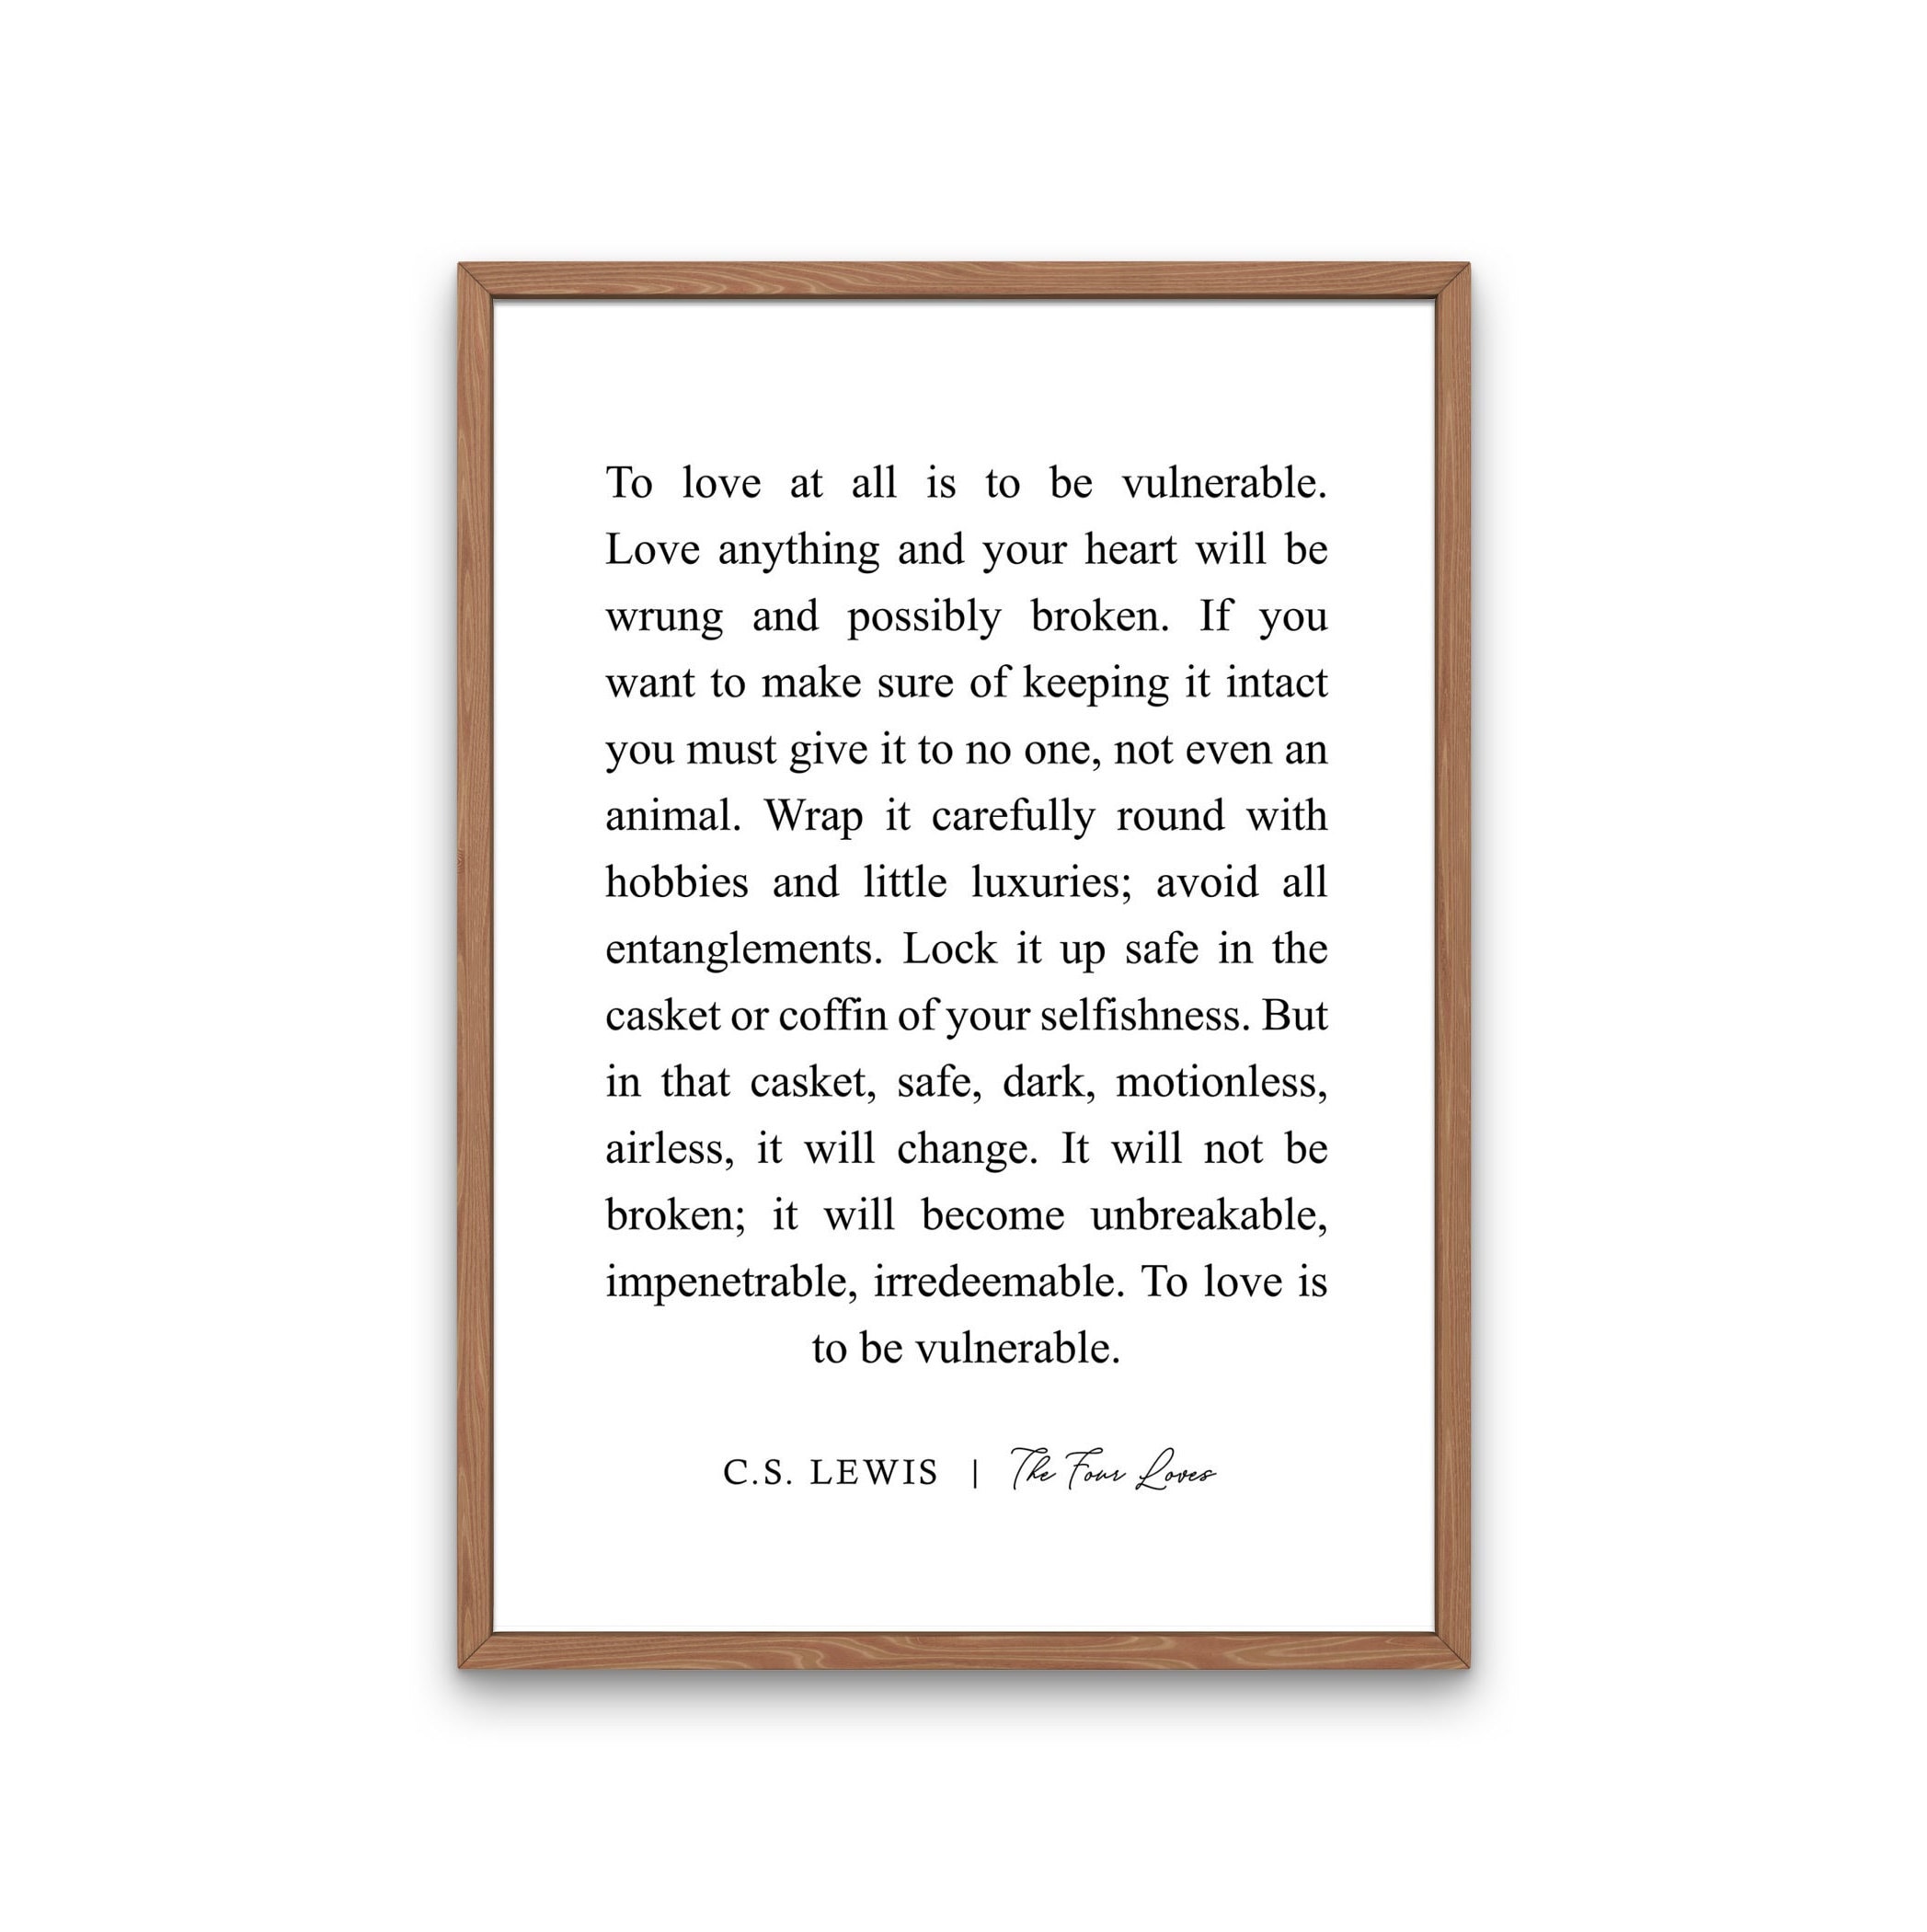 C. S. Lewis quote: I see you are an idiot, whatever else you may